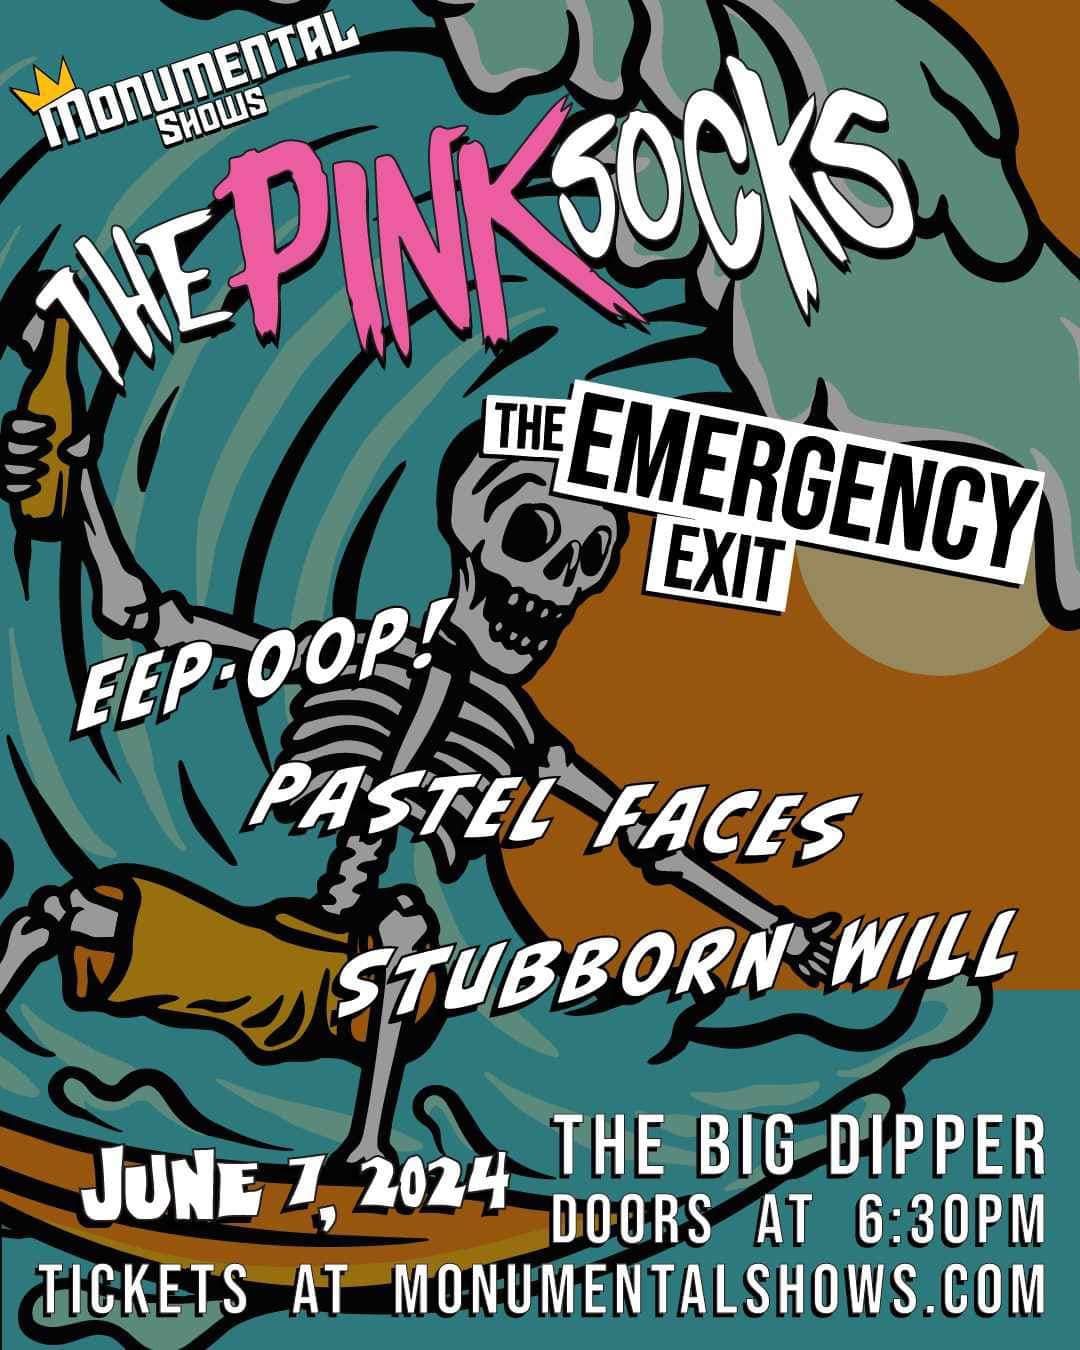 Monumental Shows presents: The Pink Socks, The Emergency Exit and more LIVE 